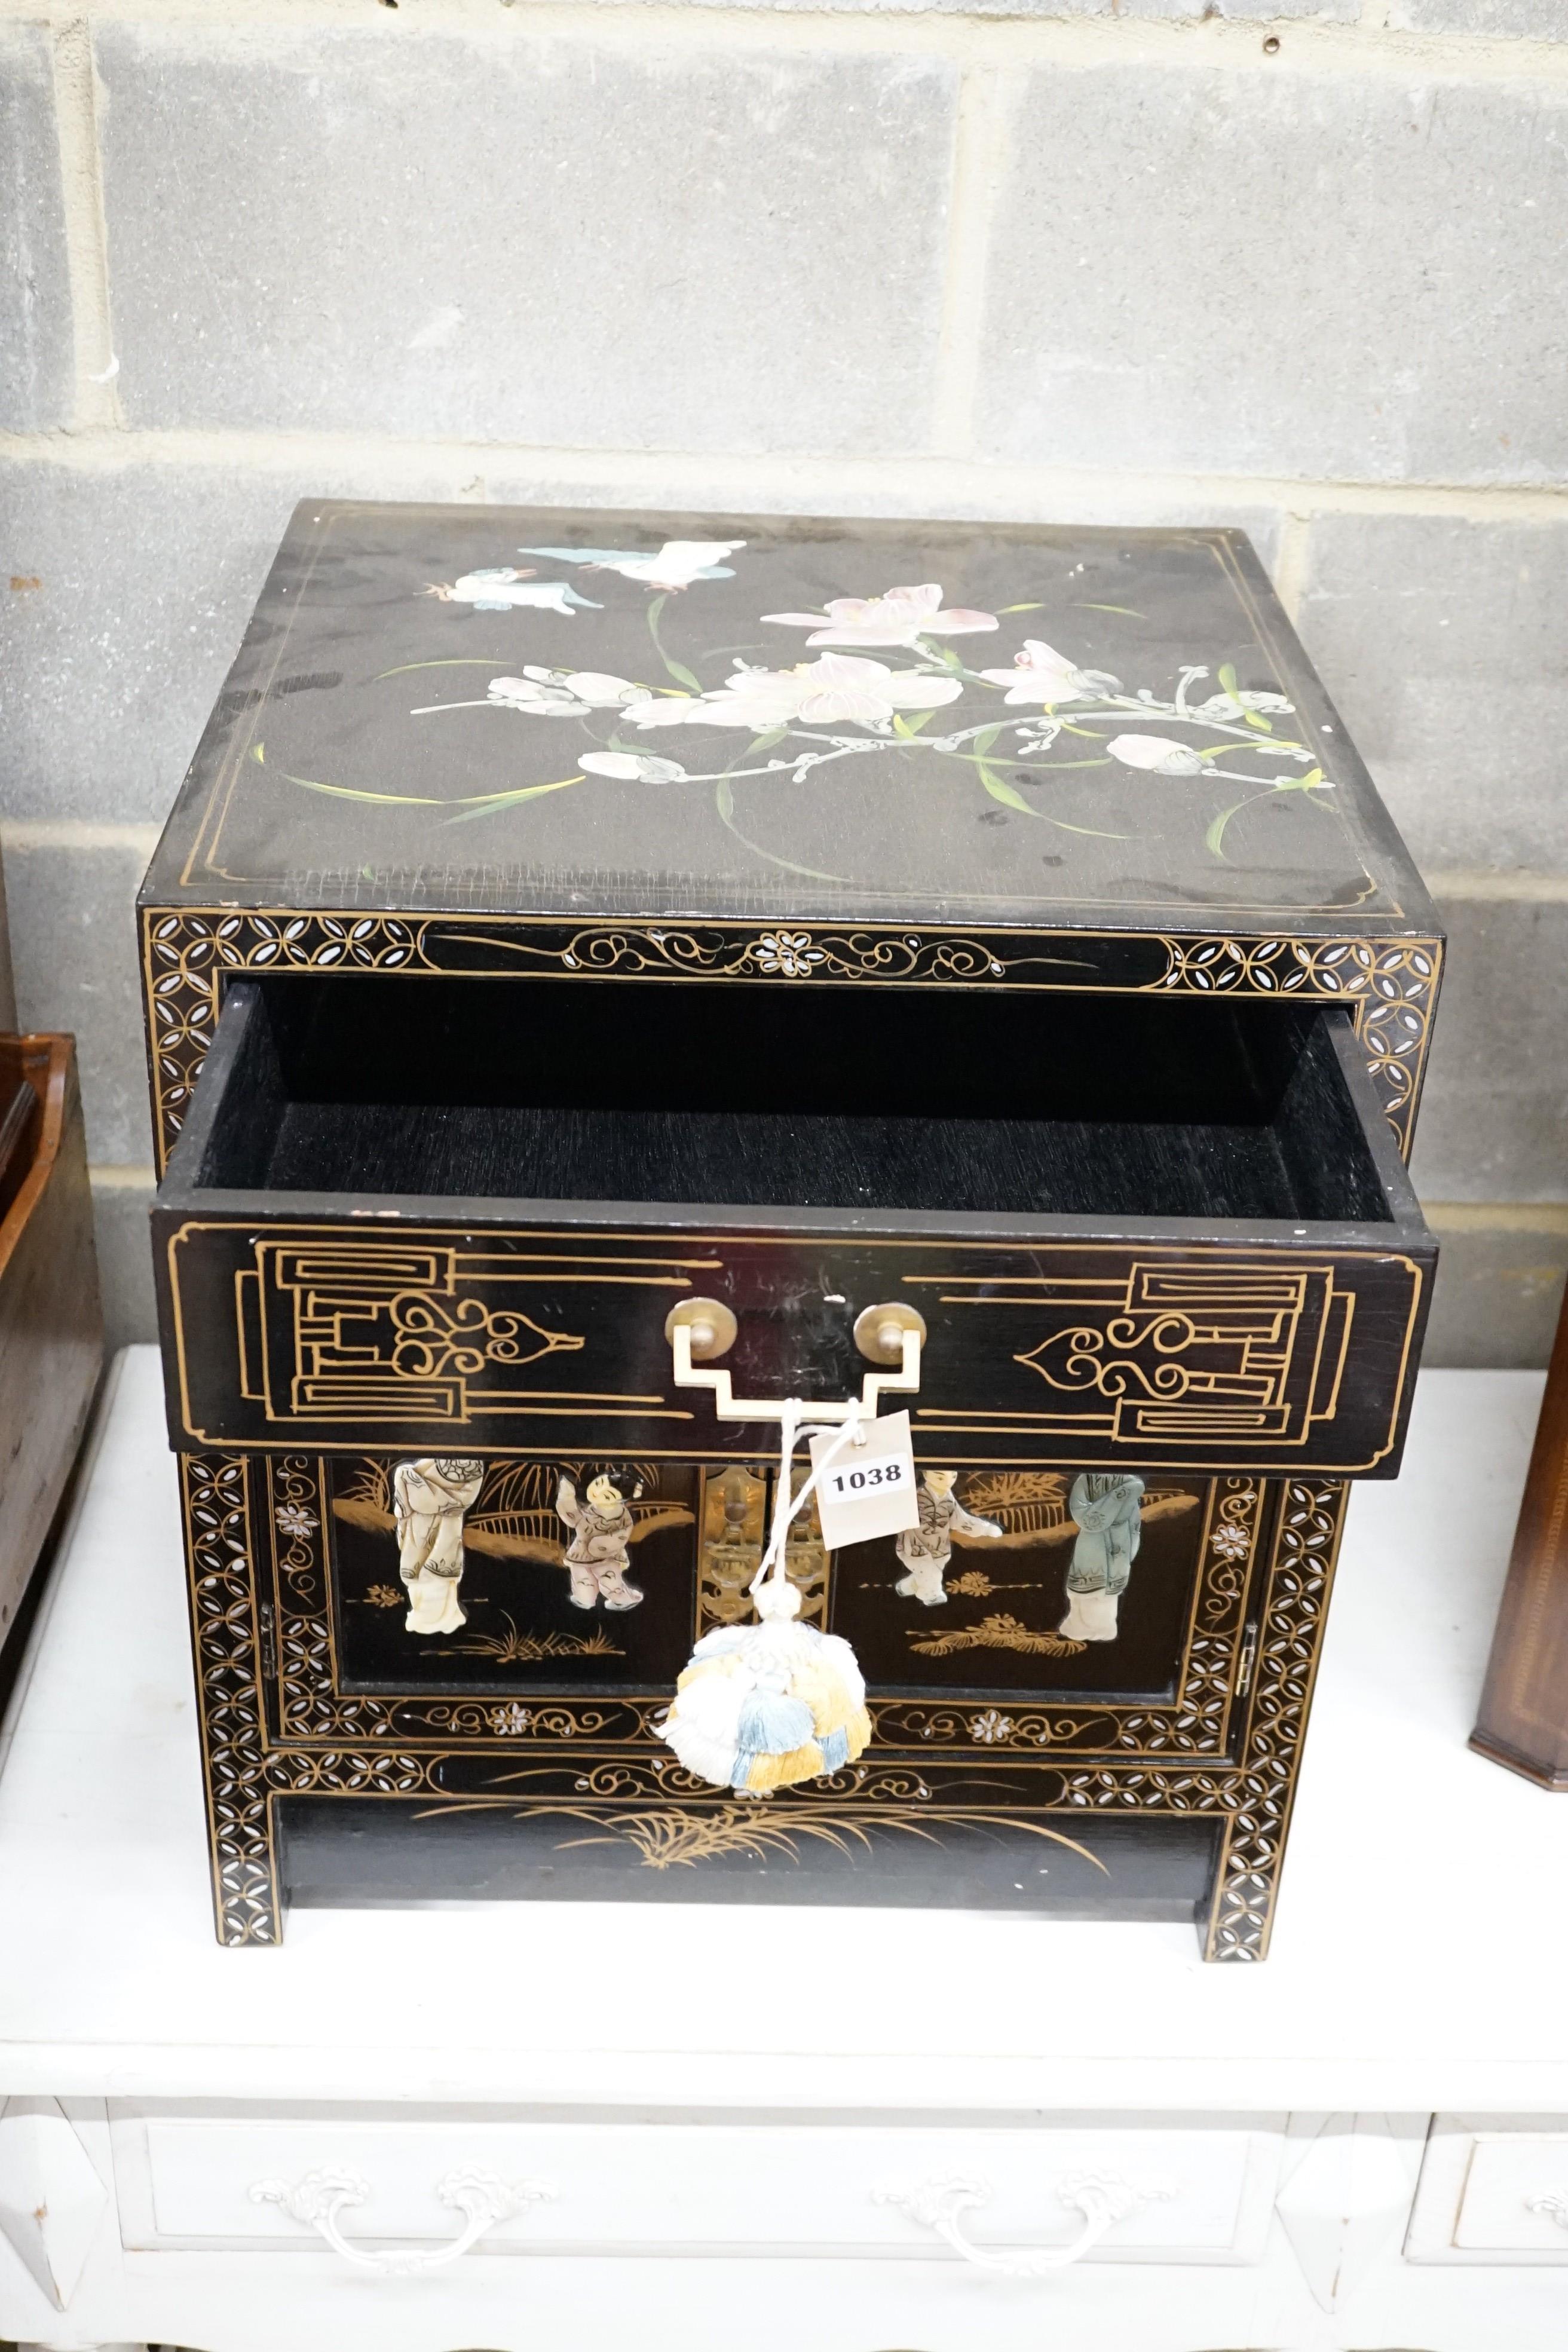 A Chinese black-lacquered brass-mounted small two-door cabinet, the door panels decorated with figures, width 51cm, depth 51cm, height 56cm.